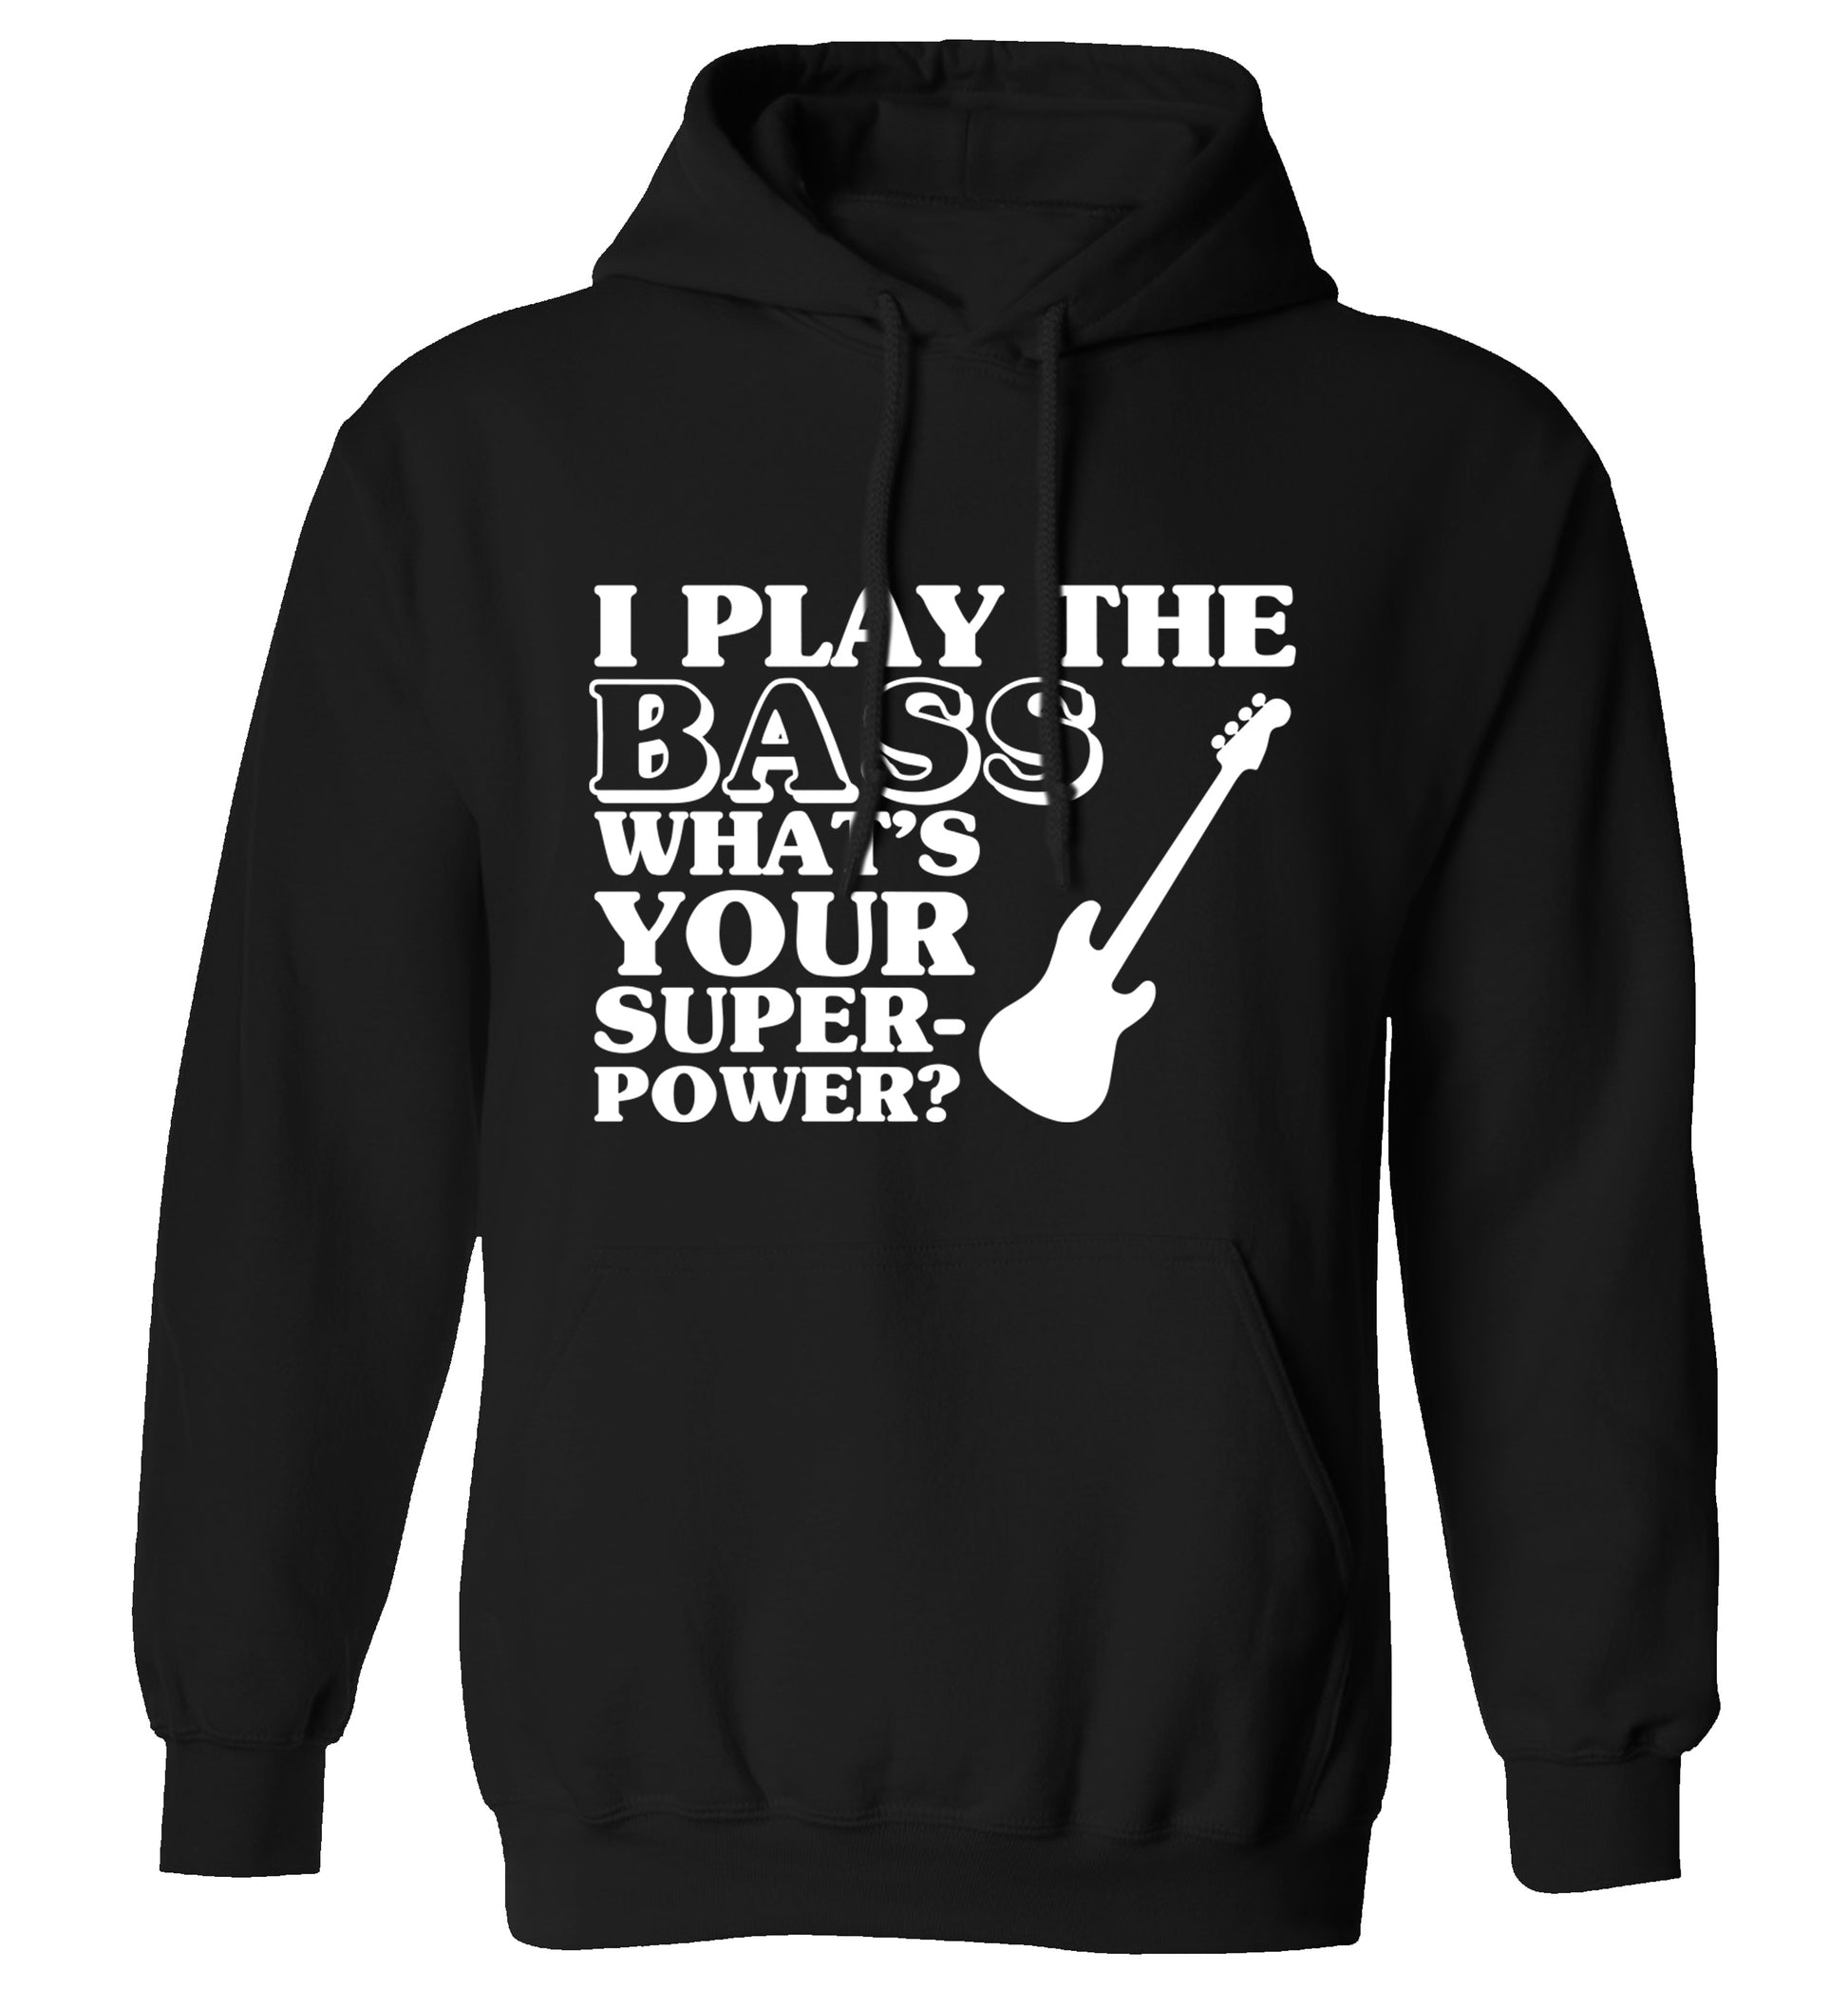 I play the bass what's your superpower? adults unisex black hoodie 2XL